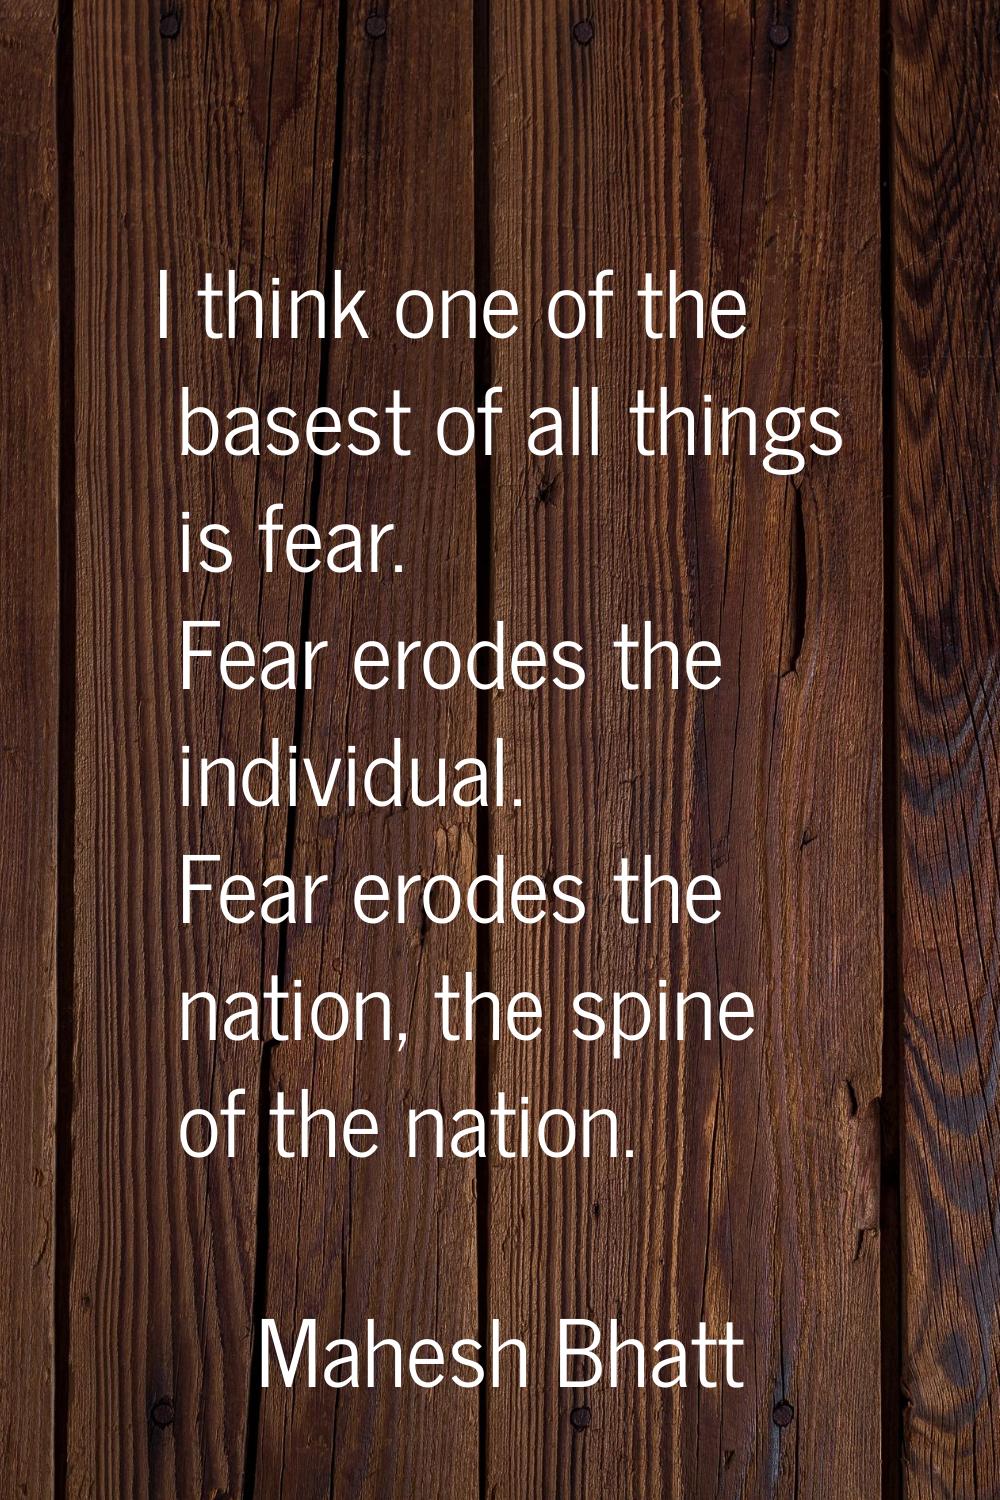 I think one of the basest of all things is fear. Fear erodes the individual. Fear erodes the nation